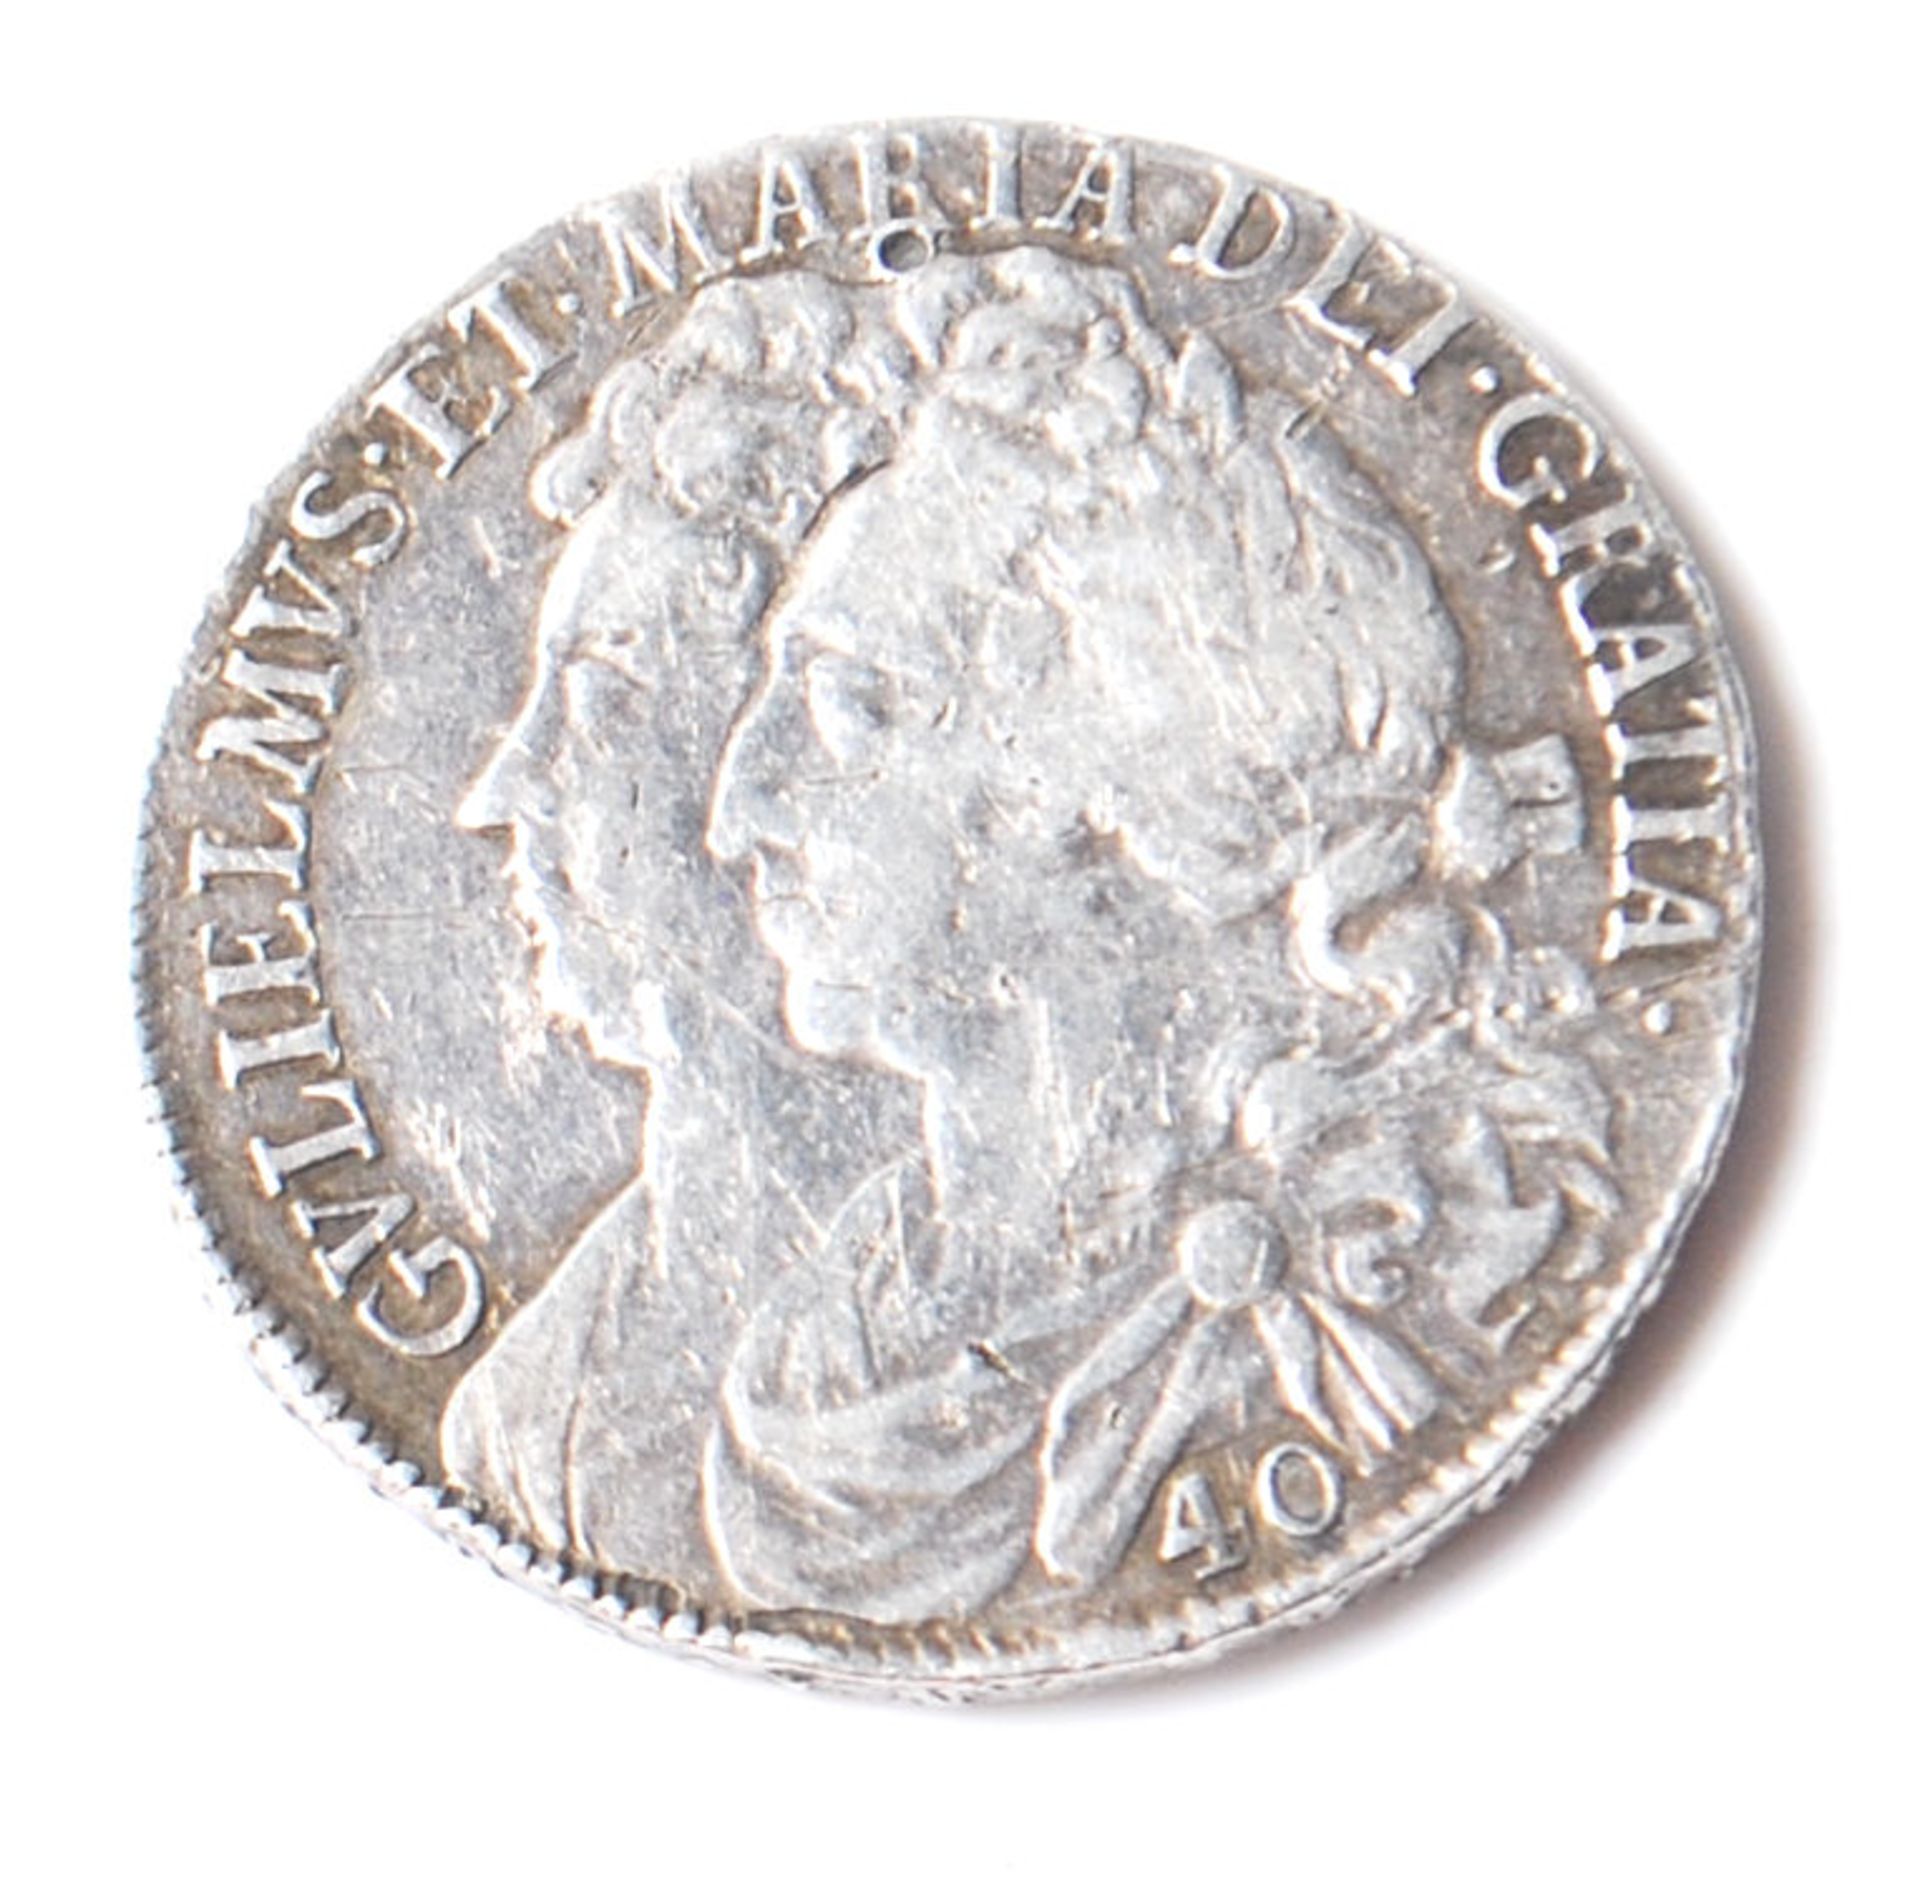 17TH CENTURY KING WILLIAM III 40 SHILLING COIN / SILVER COIN